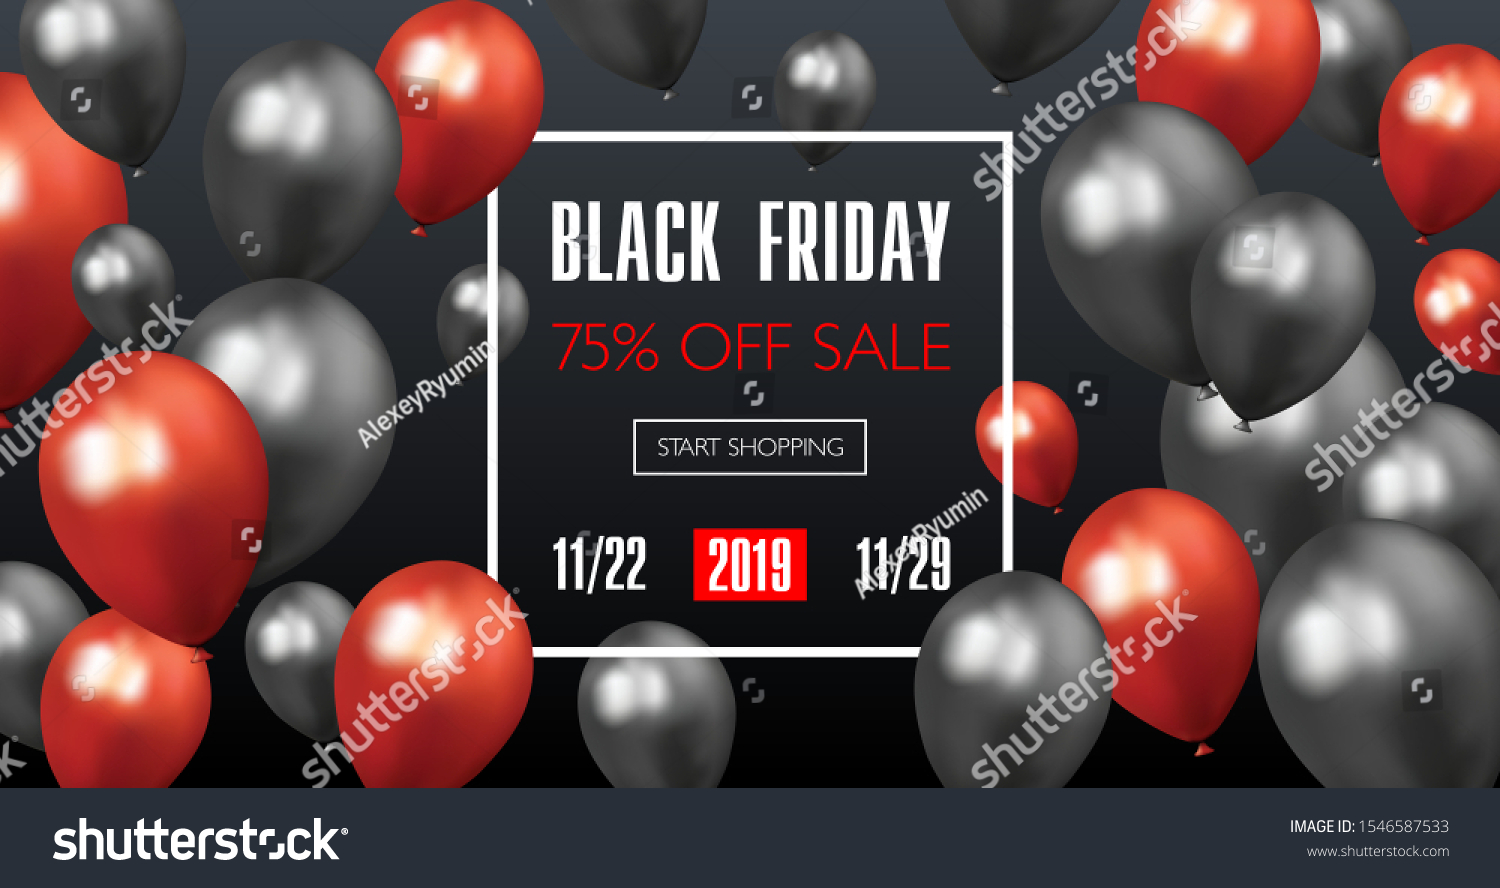 Social network post, website, banner or email marketing vector layout template with Black Friday Sale and Start Shopping lettering on black background with red and black ballons.